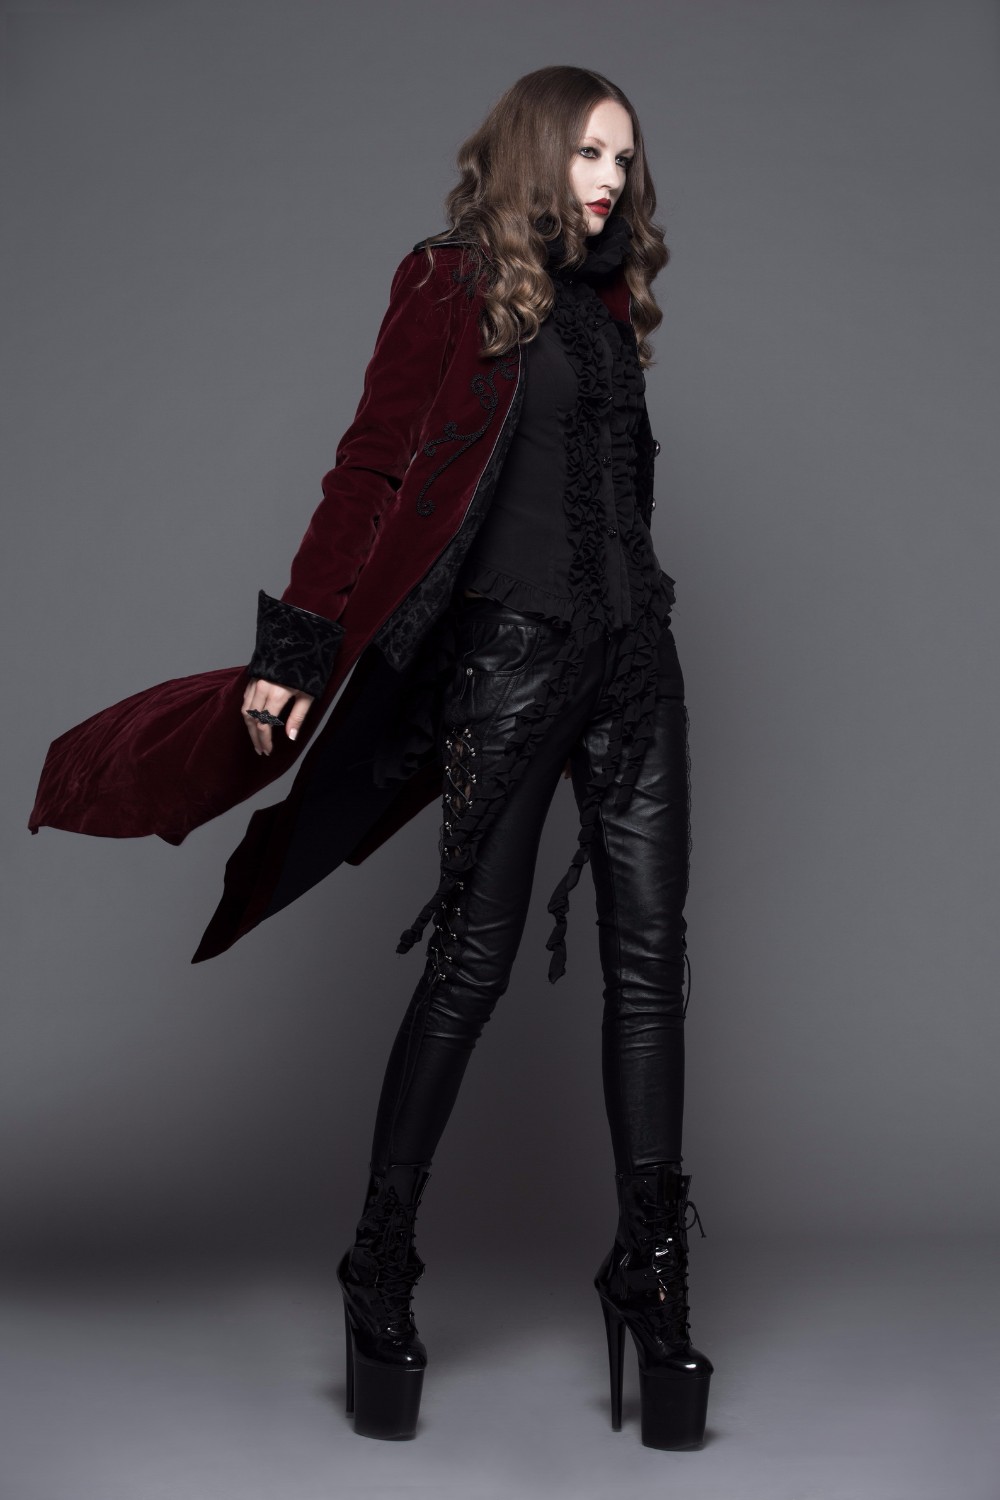 Devil-Fashion-Gothic-Long-Aristocratic-Women-Thick-Winter-Coats-Steampunk-Jackets-Ladies-Overcoats-W-32773532328